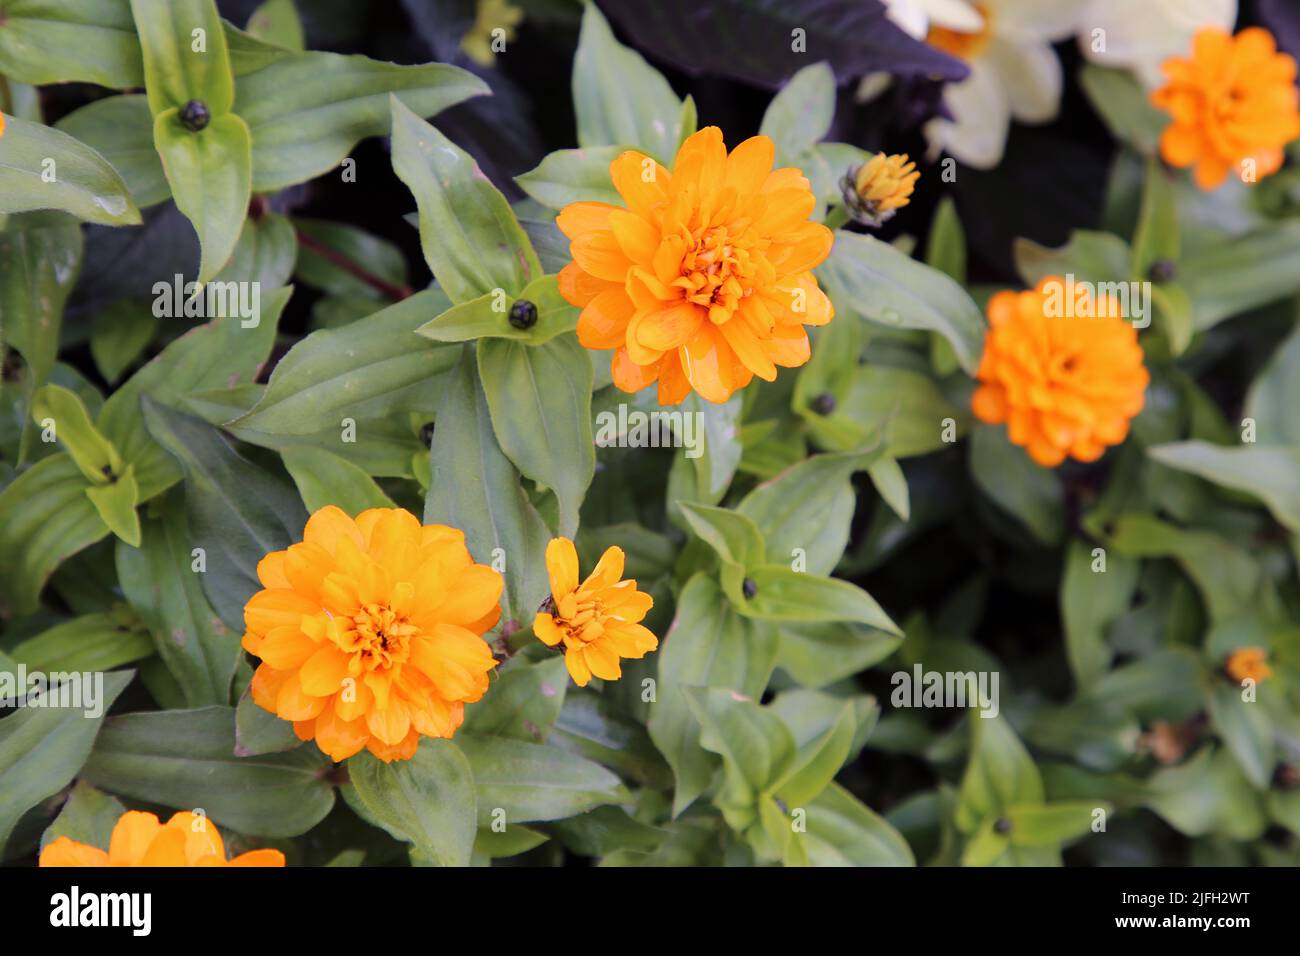 Orange chrysanthemum aka Dahlia flowers with green leaves photographed in a garden in Helsinki, Finland during a sunny fall day. Closeup color image. Stock Photo